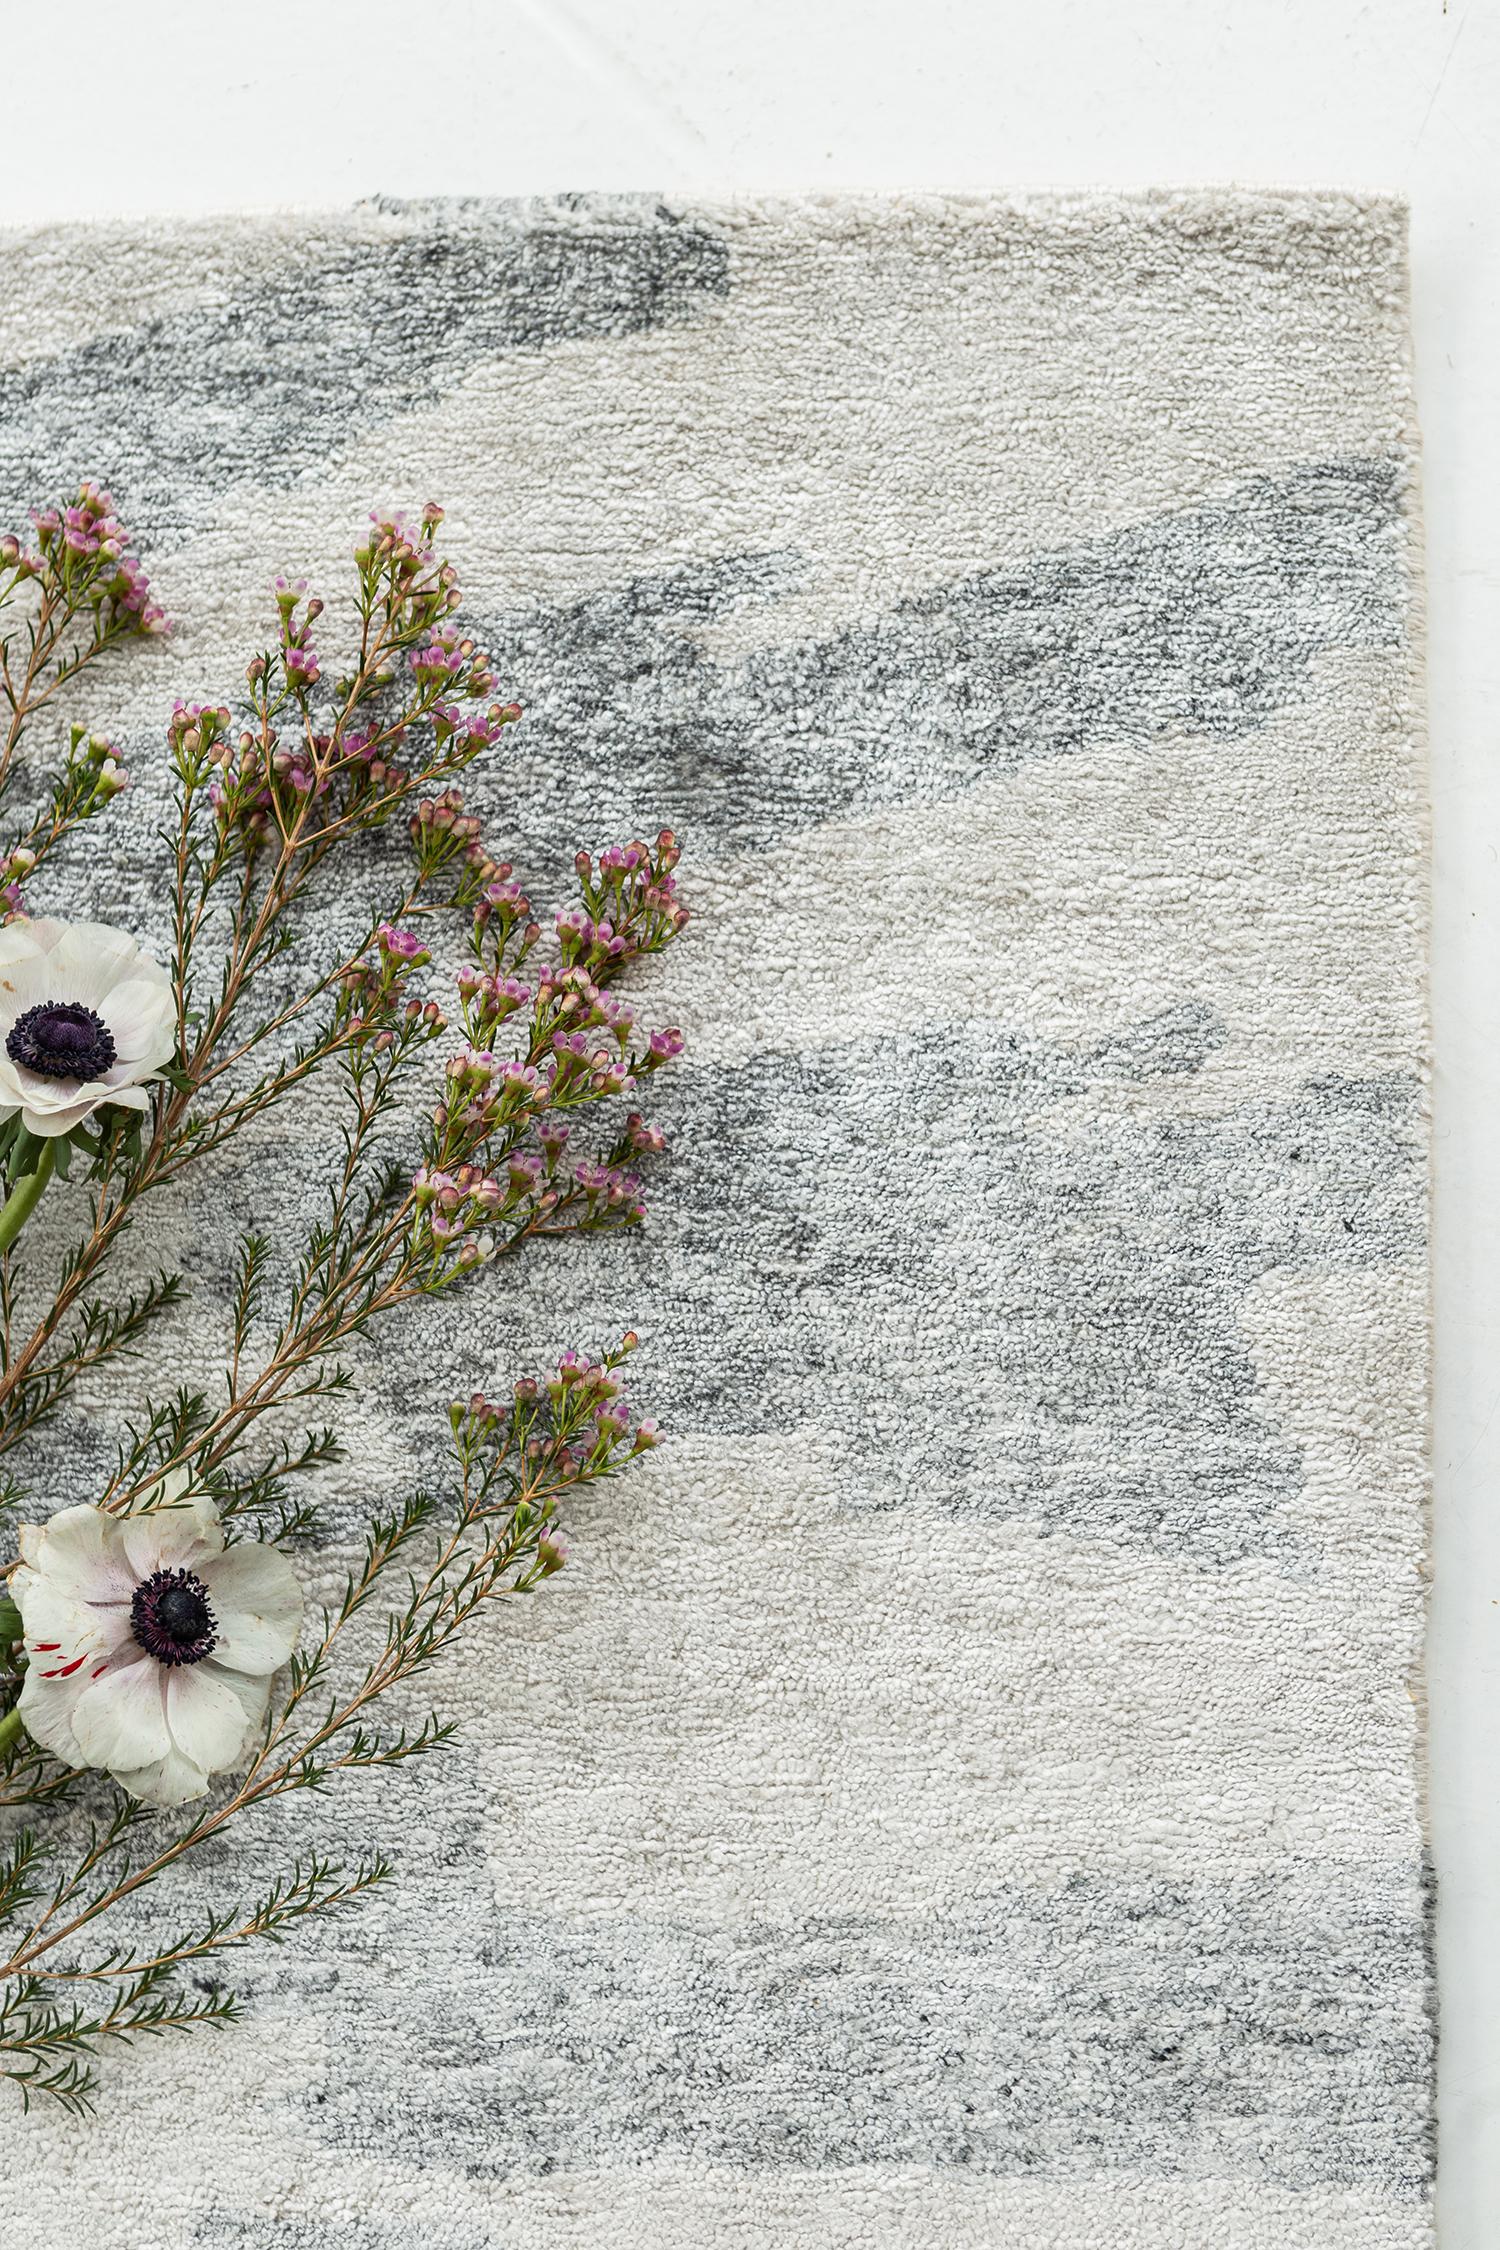 Experience peace and the harmony of nature with Amabie from the Yokai Collection. This gray silk rug features gentle, natural tones and an earthy texture. Use it in your modern interior design to provide a grounding detail to any room

Rug